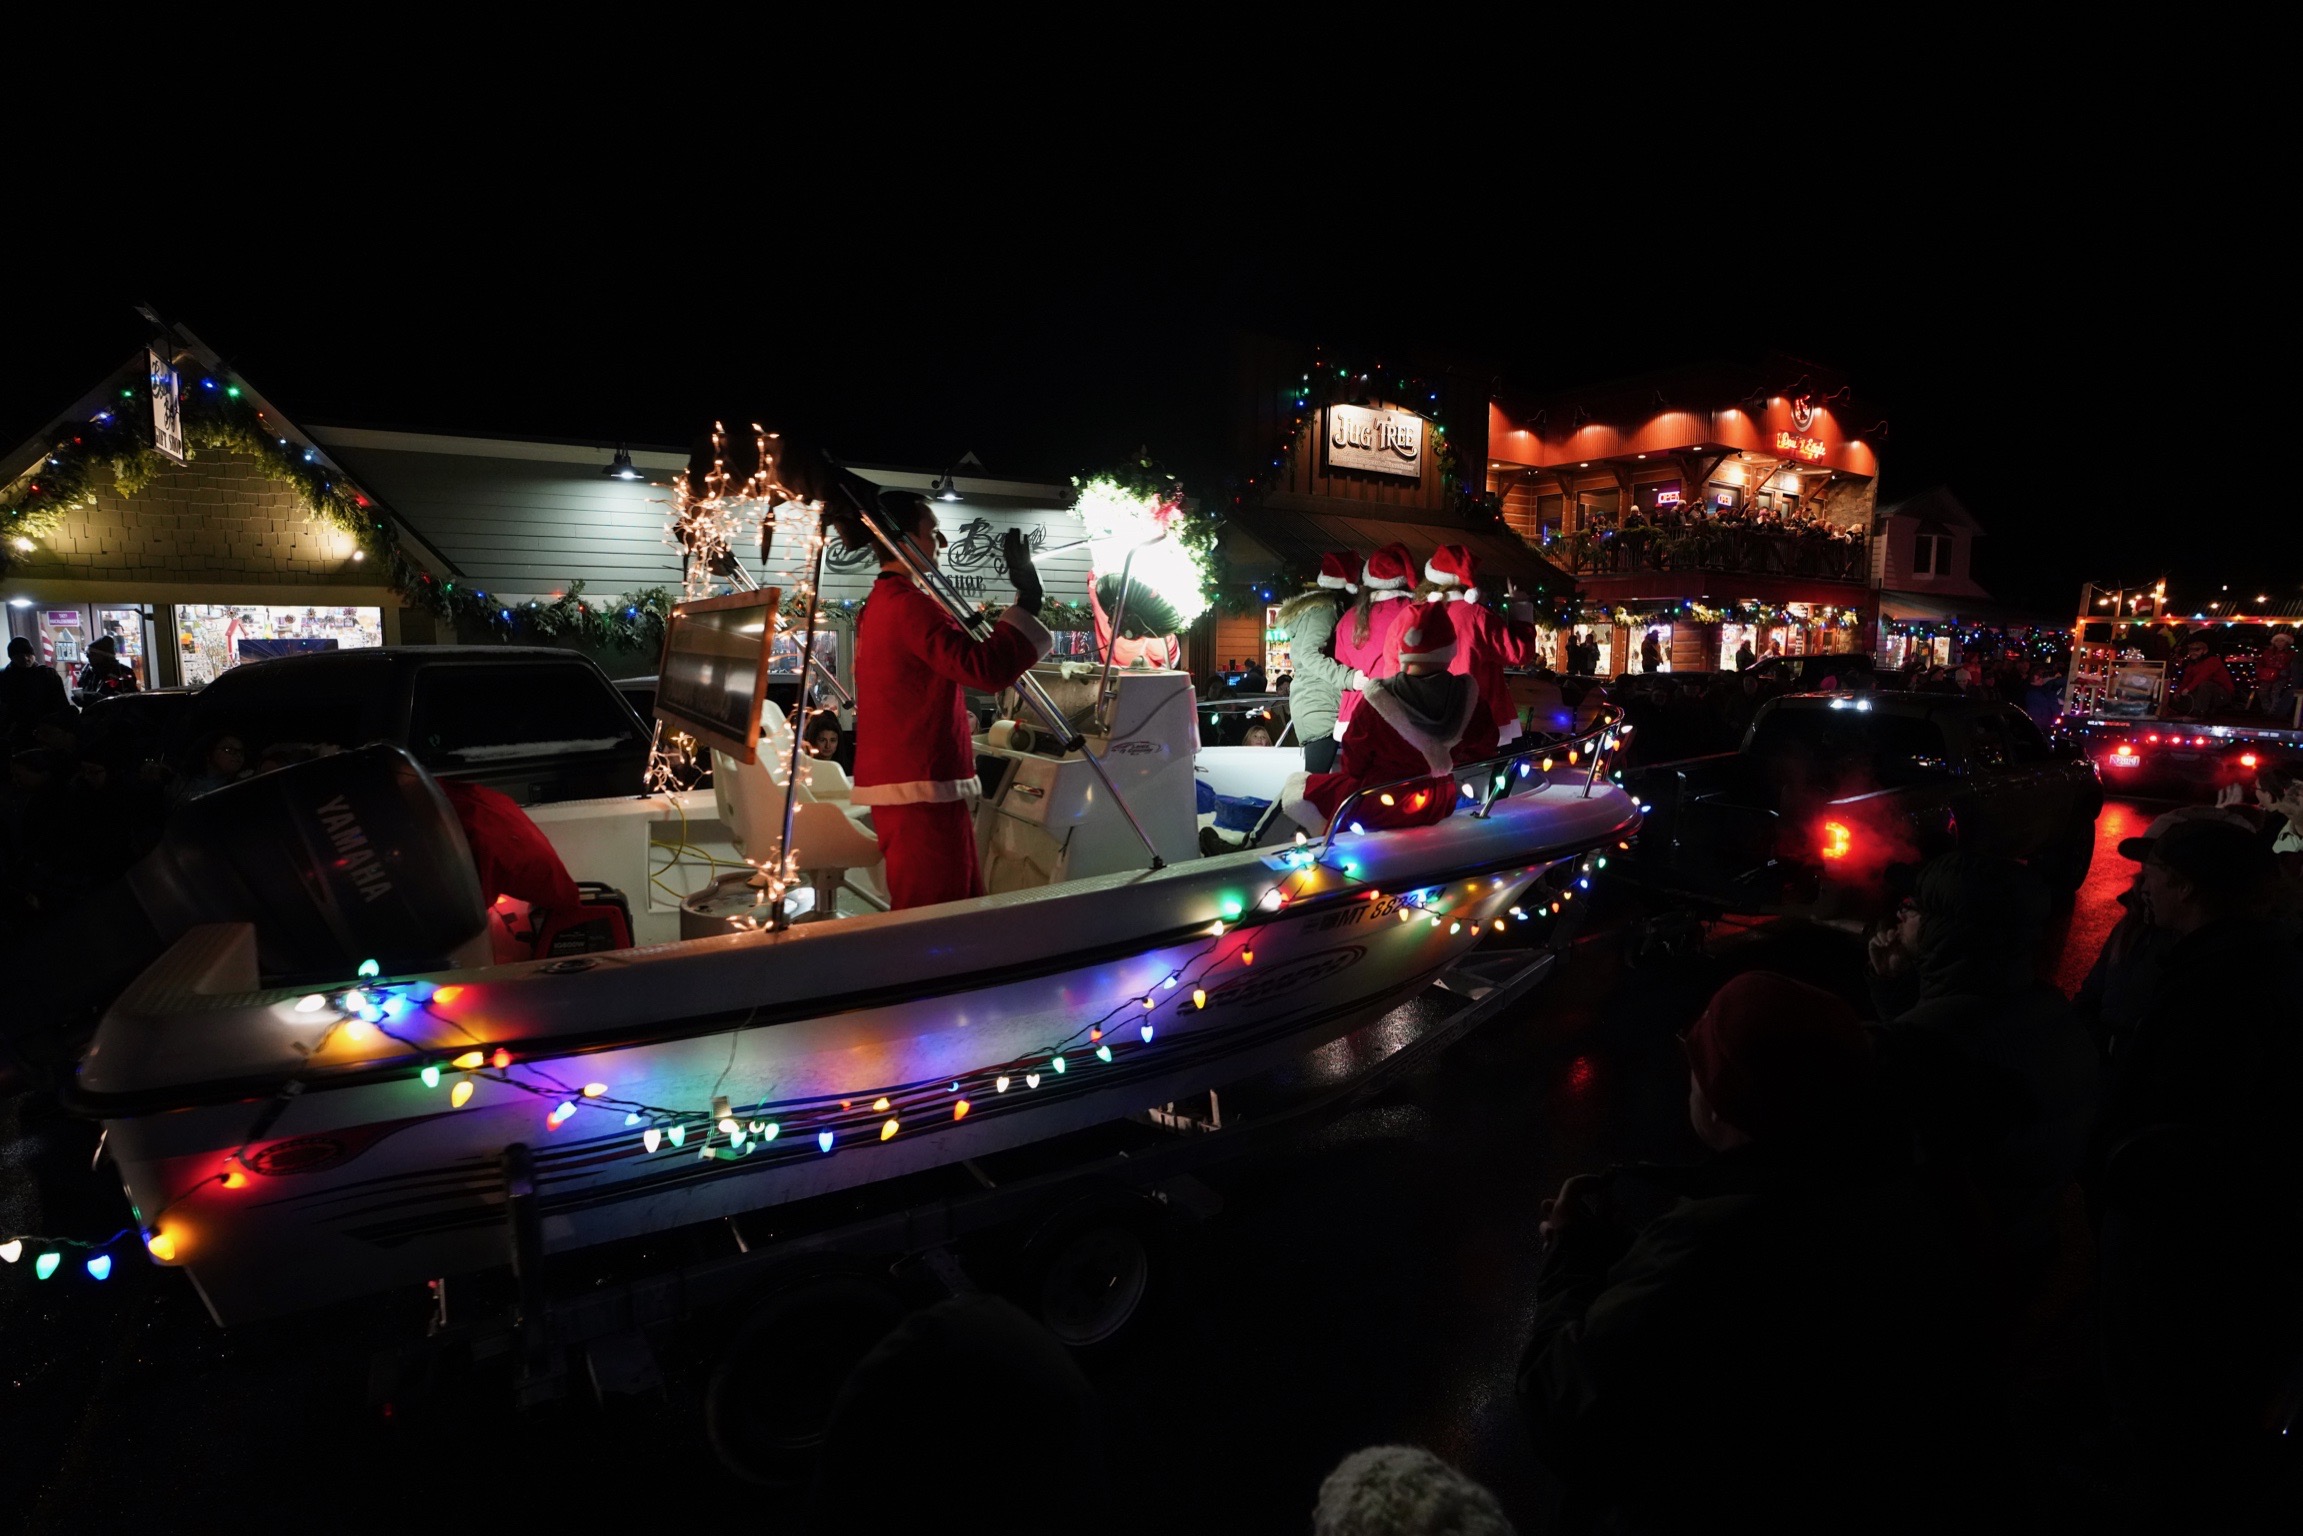 A crowd gathers on a temperate December night for the Annual Bigfork, MT. Christmas Parade.